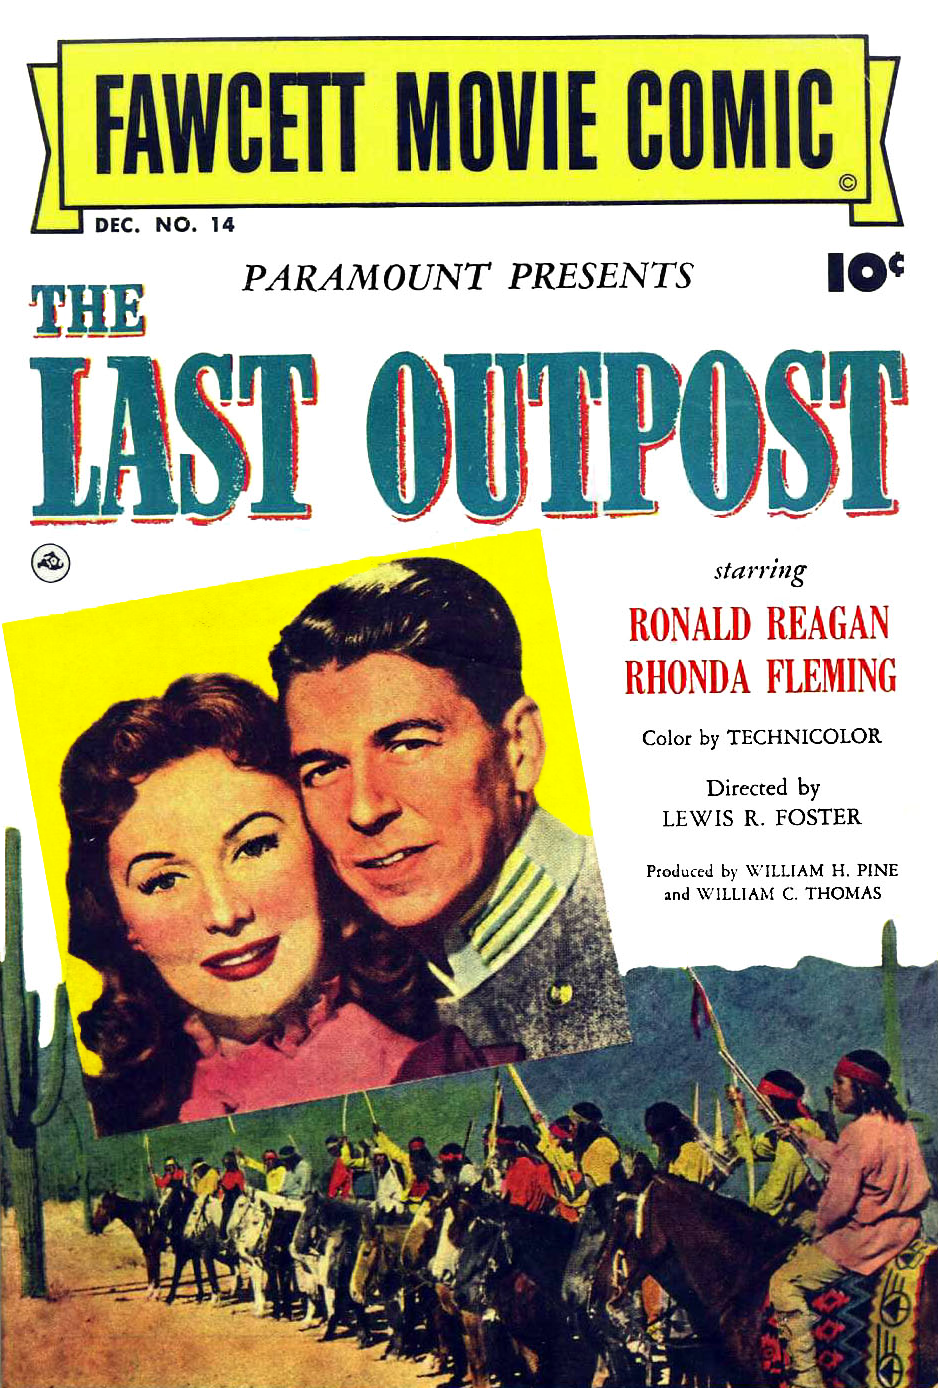 Movie poster for "The Last Outpost" starring Rhonda Fleming and Ronald Reagan. | Source: Wikimedia Commons.